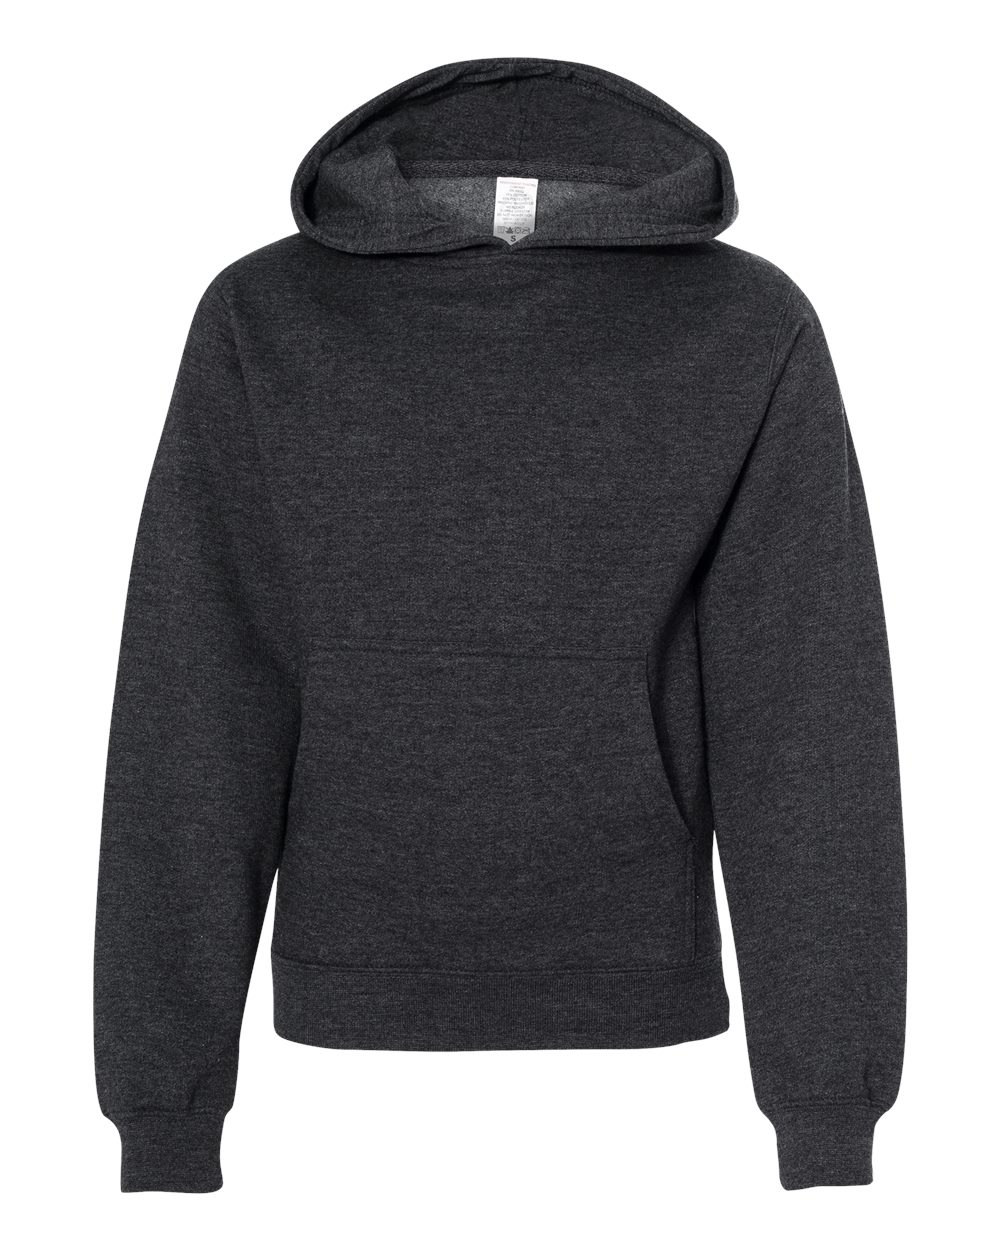 Youth Midweight Hooded Sweatshirt-Independent Trading Co.